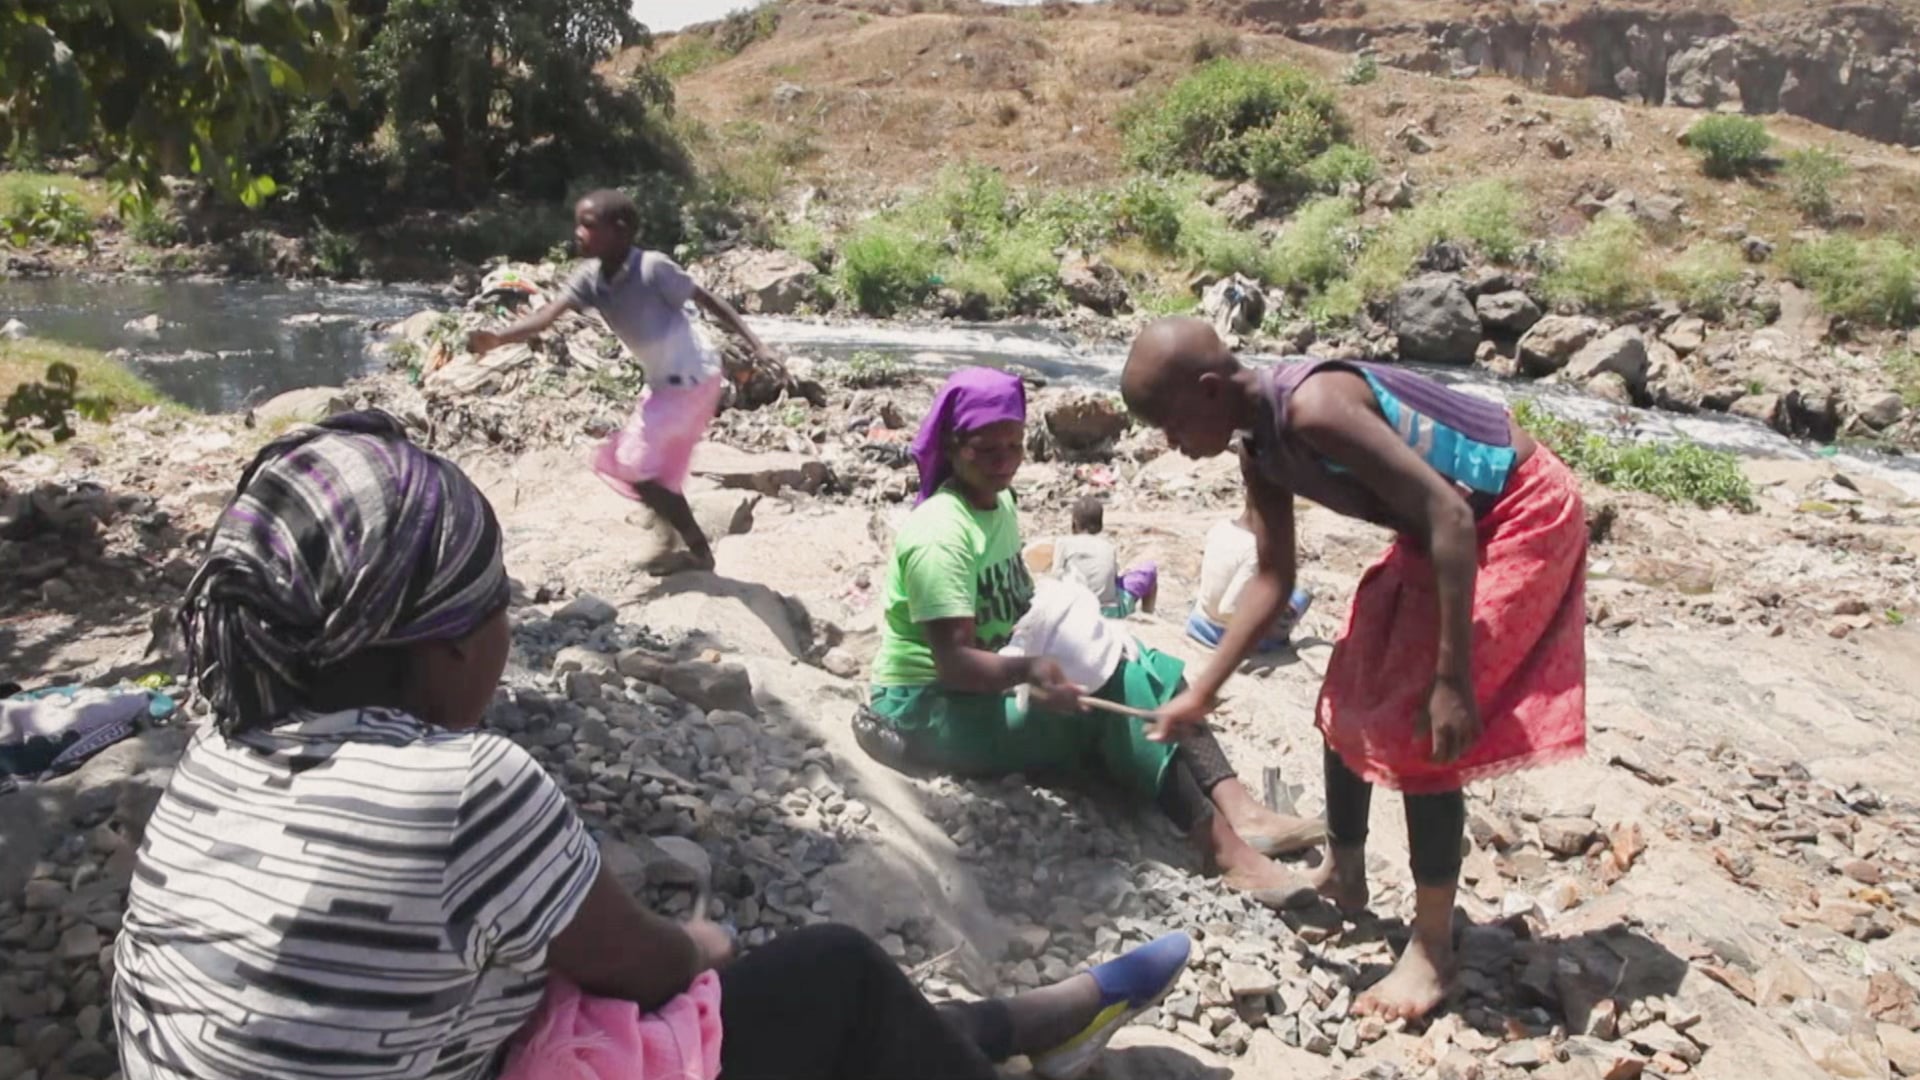 Red Nose Day 2017 Kenya Appeal Film - Mildred in a Quarry